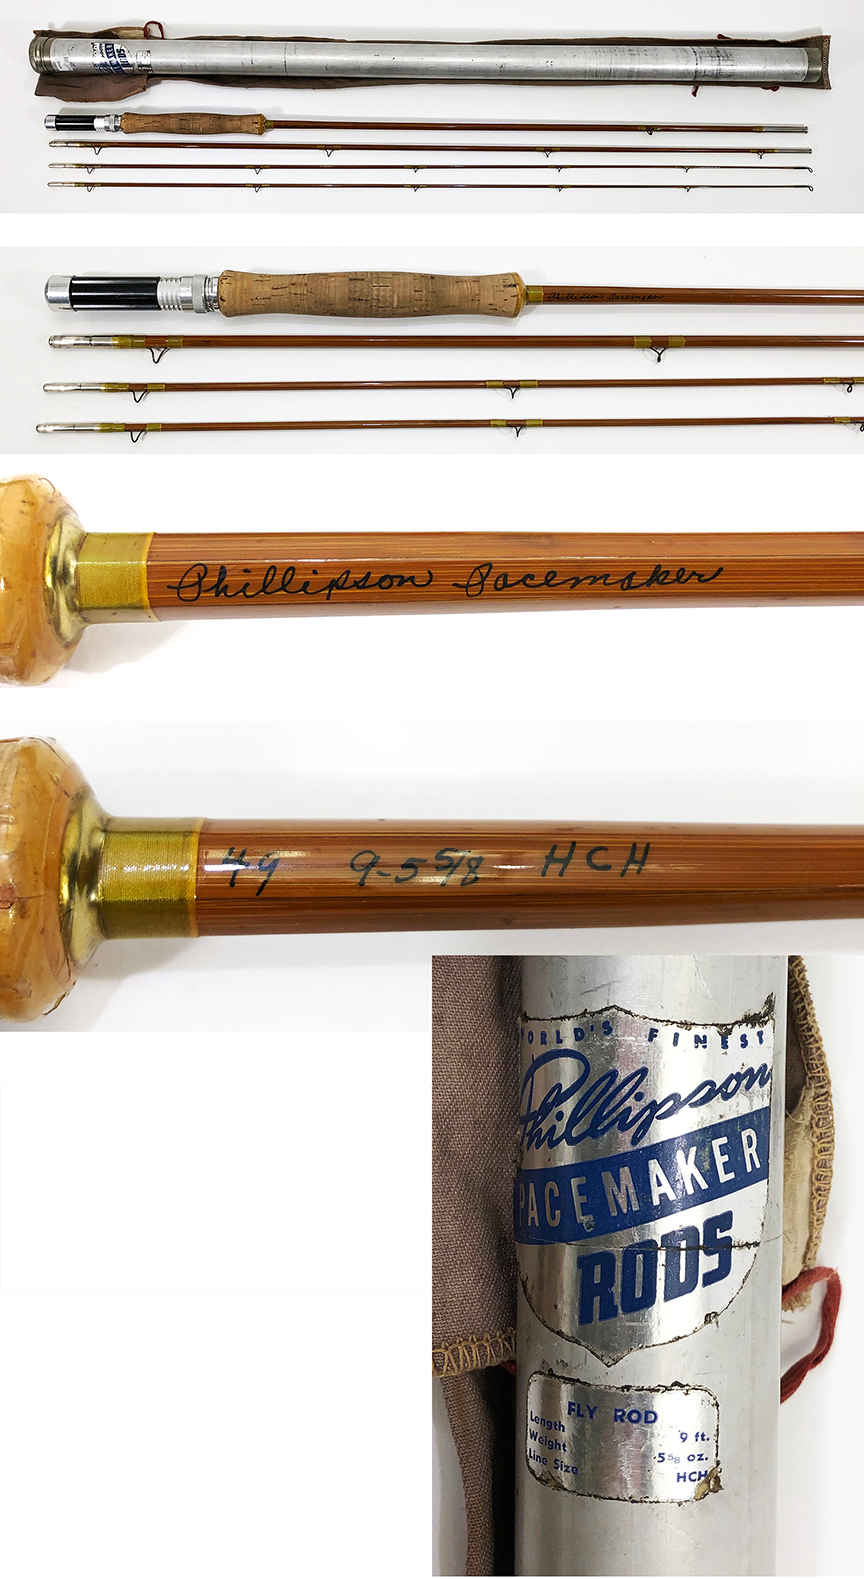 PHILLIPSON PACEMAKER BAMBOO FLY ROD 9'-0 7 WT. 3/2 W/TUBE!